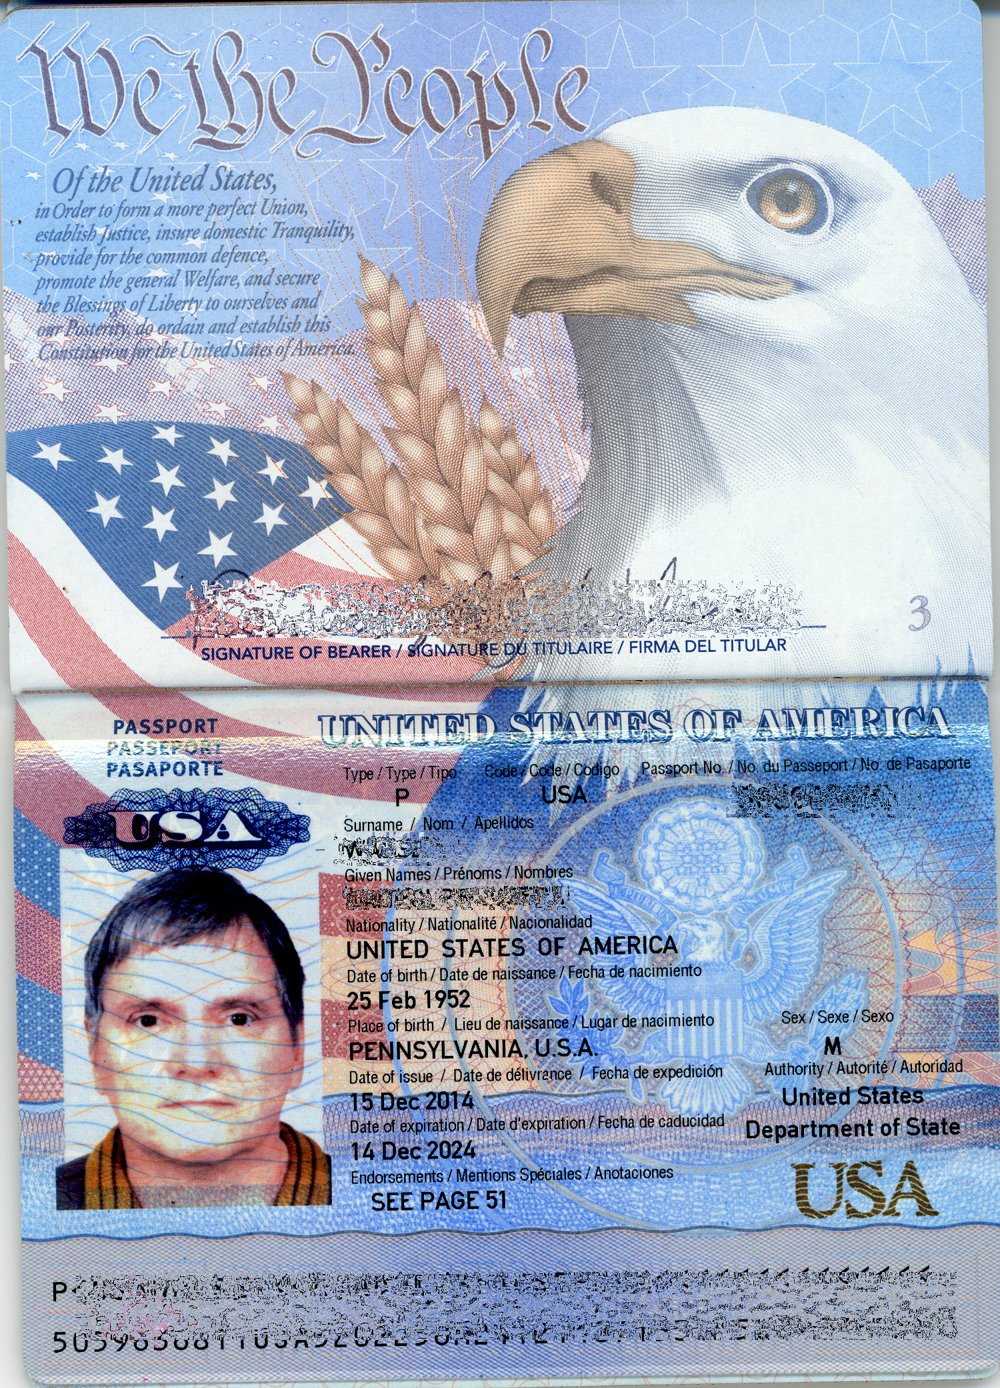 Redesigned US passport is on the way. - Passports, etc. - What to do ...